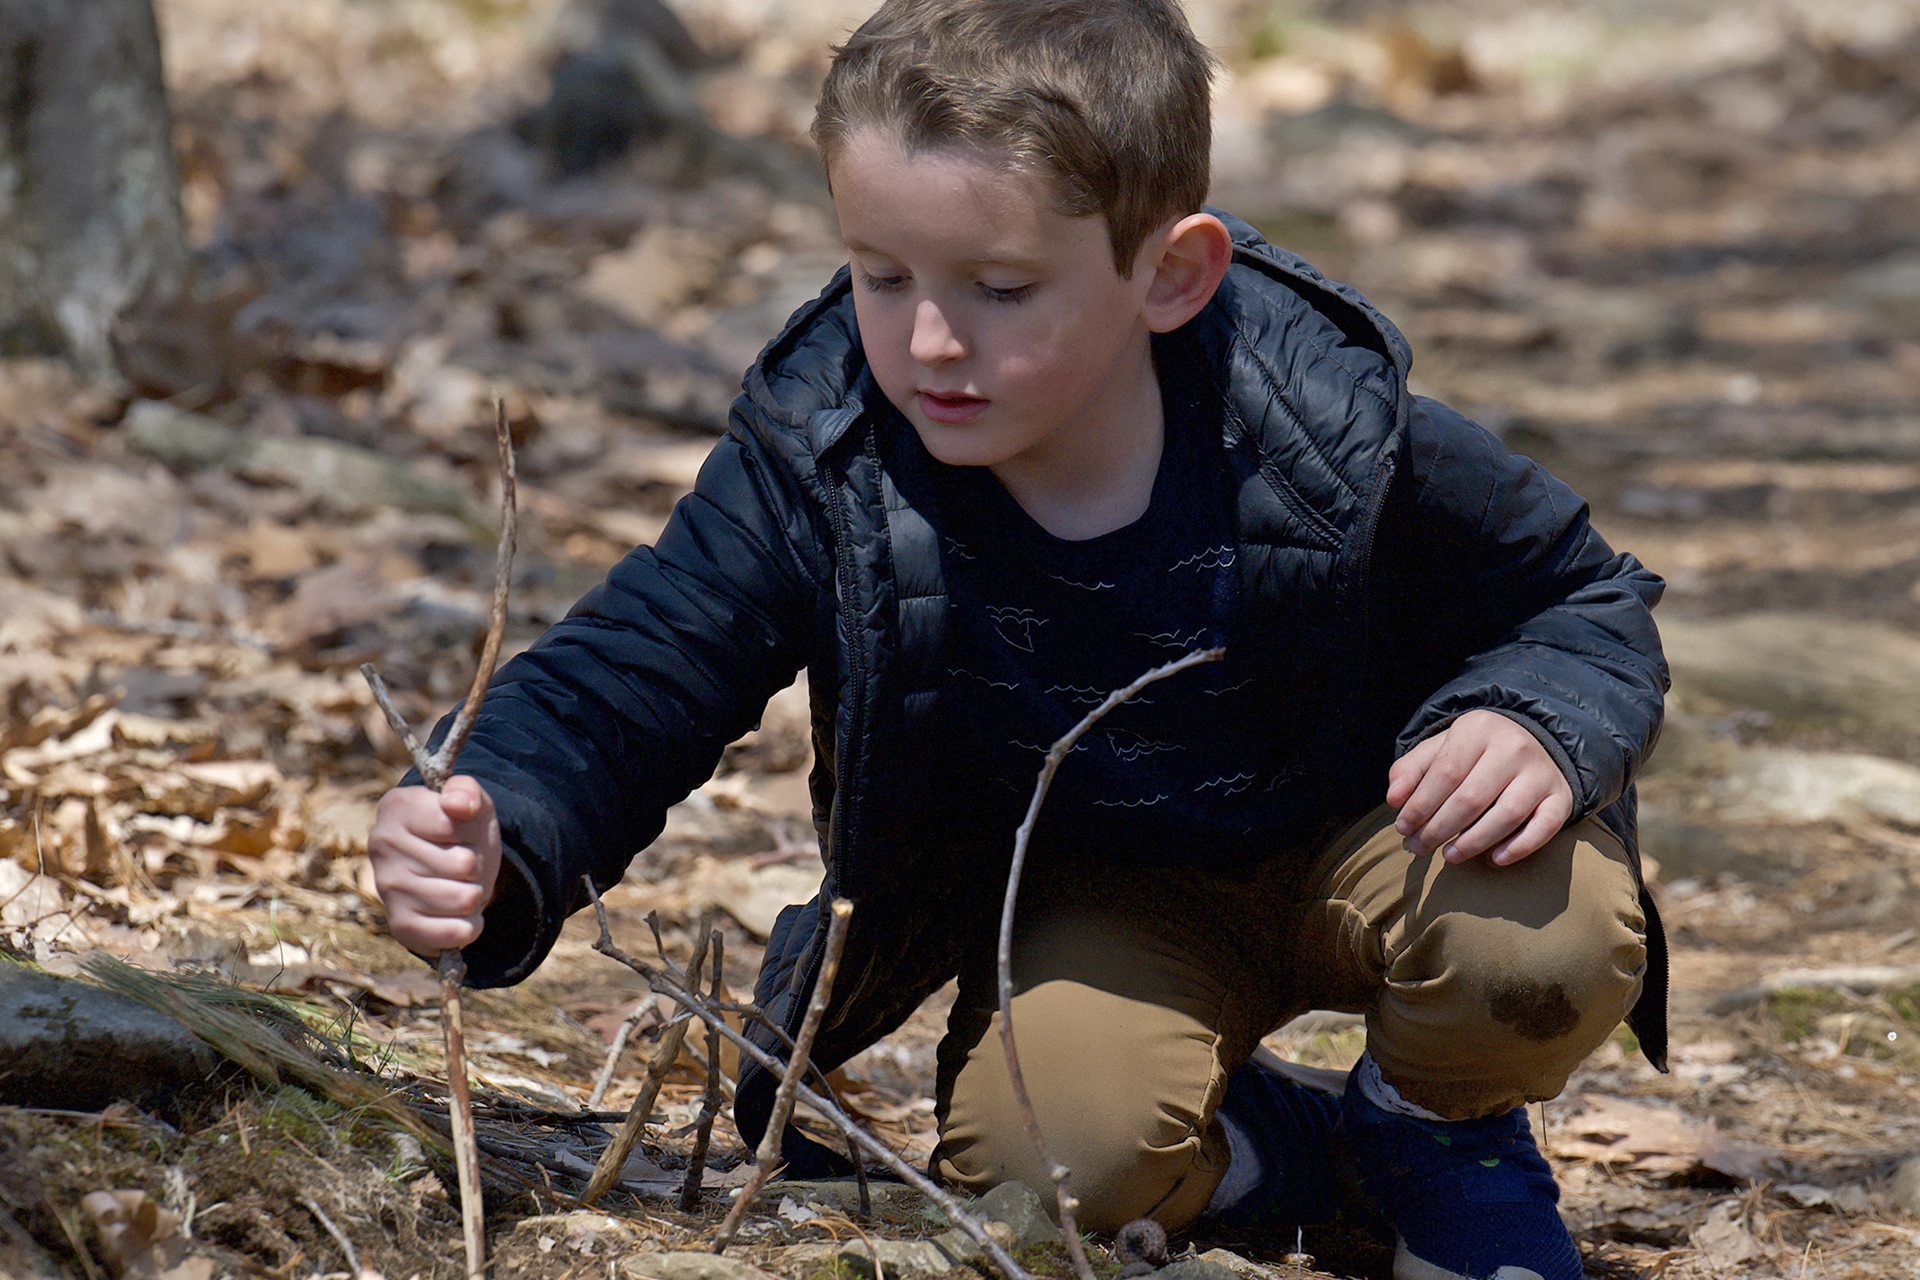 child inspecting sticks placed in the ground